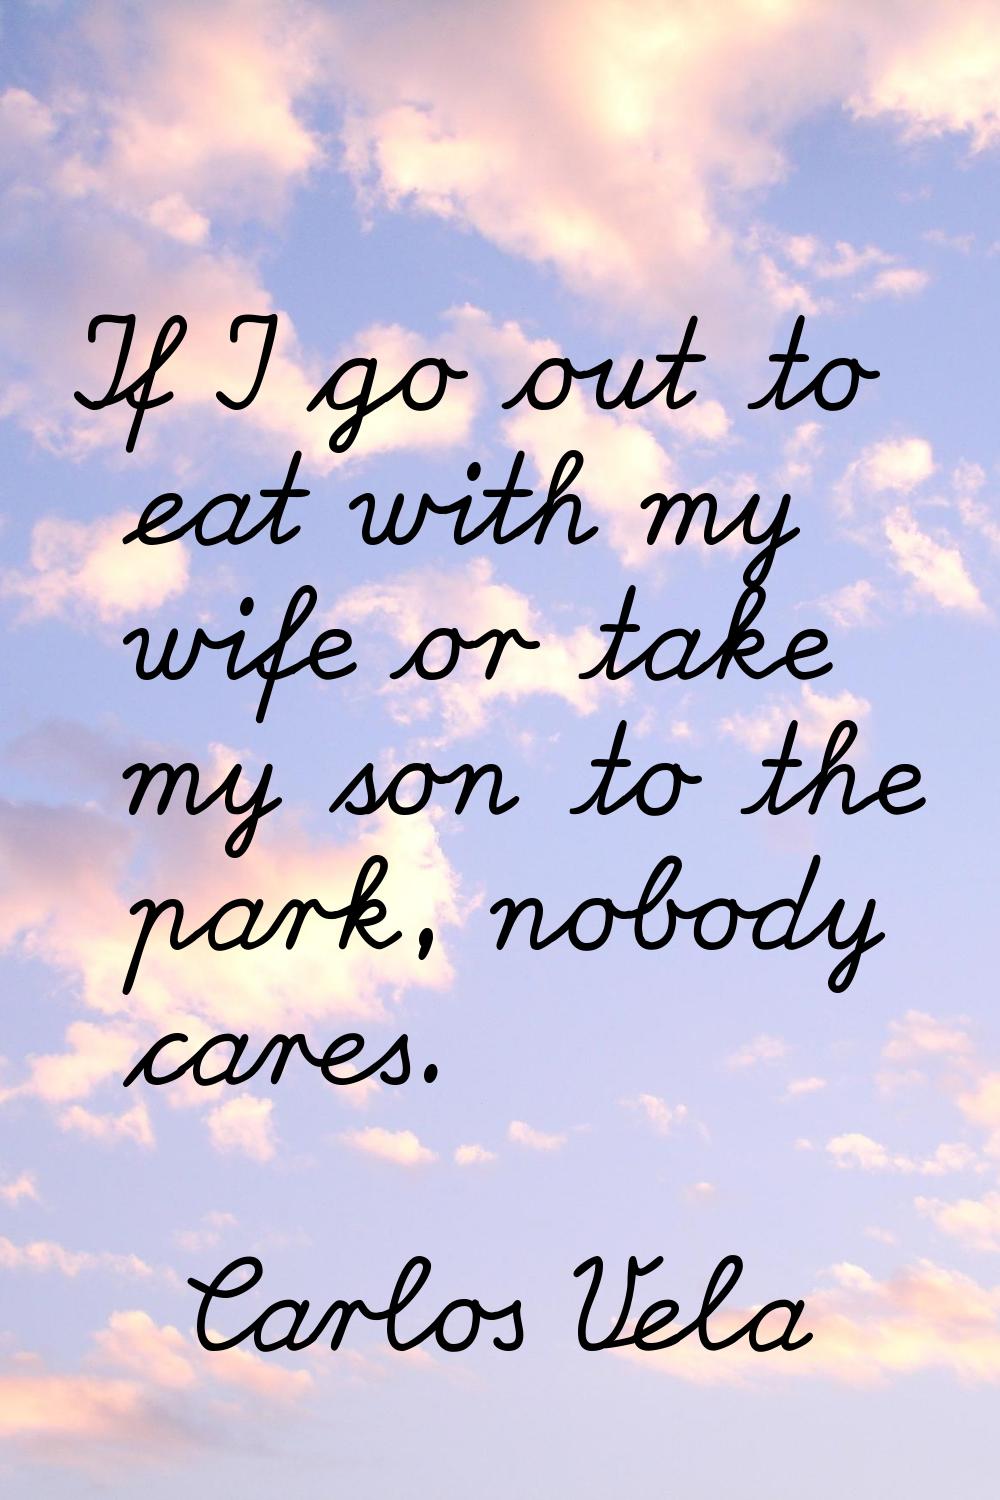 If I go out to eat with my wife or take my son to the park, nobody cares.